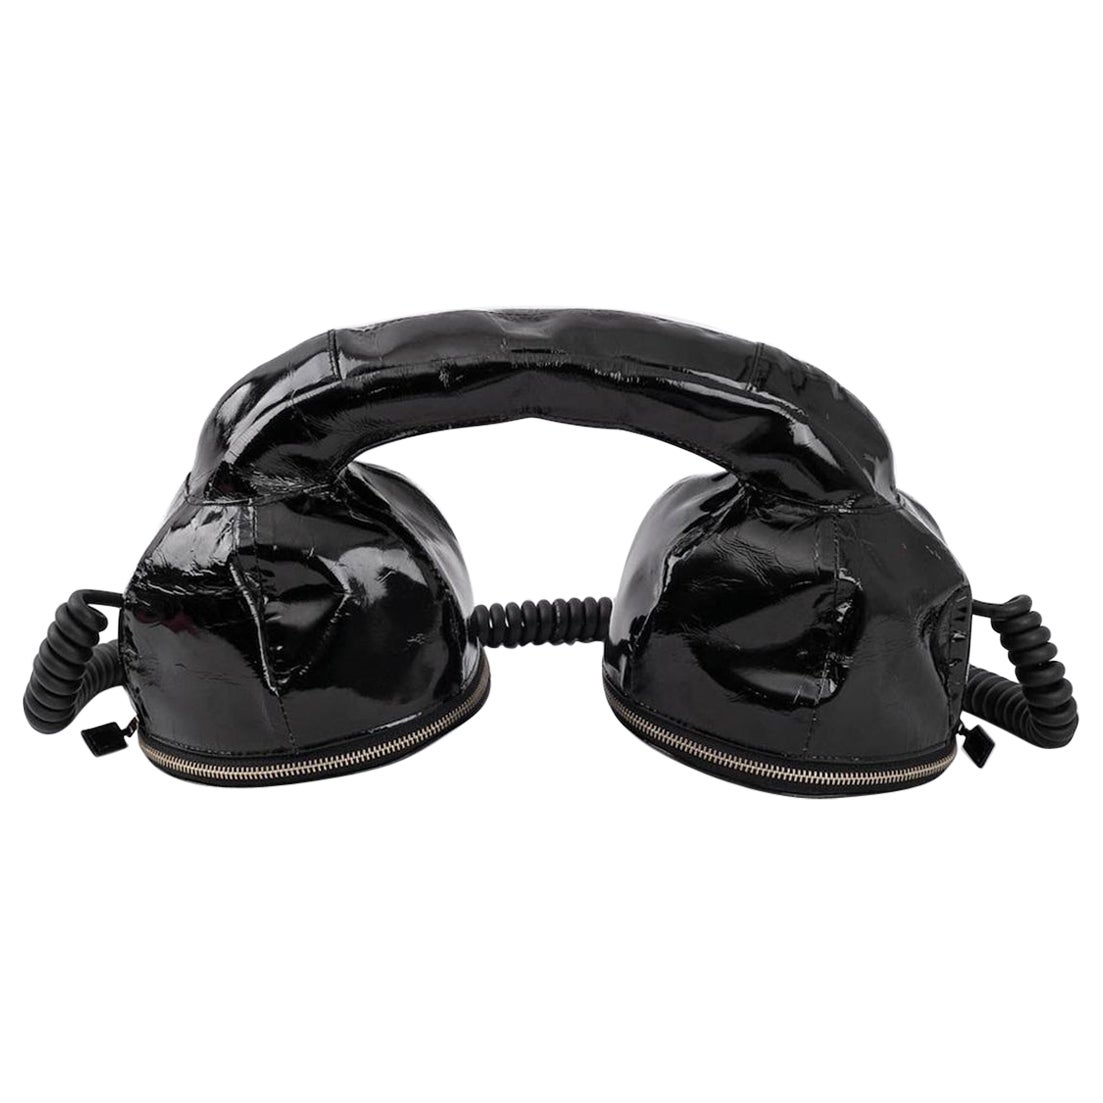 Chantal Thomass "Phone" Shoulder Bag in Black Patent Leather, 1984 For Sale